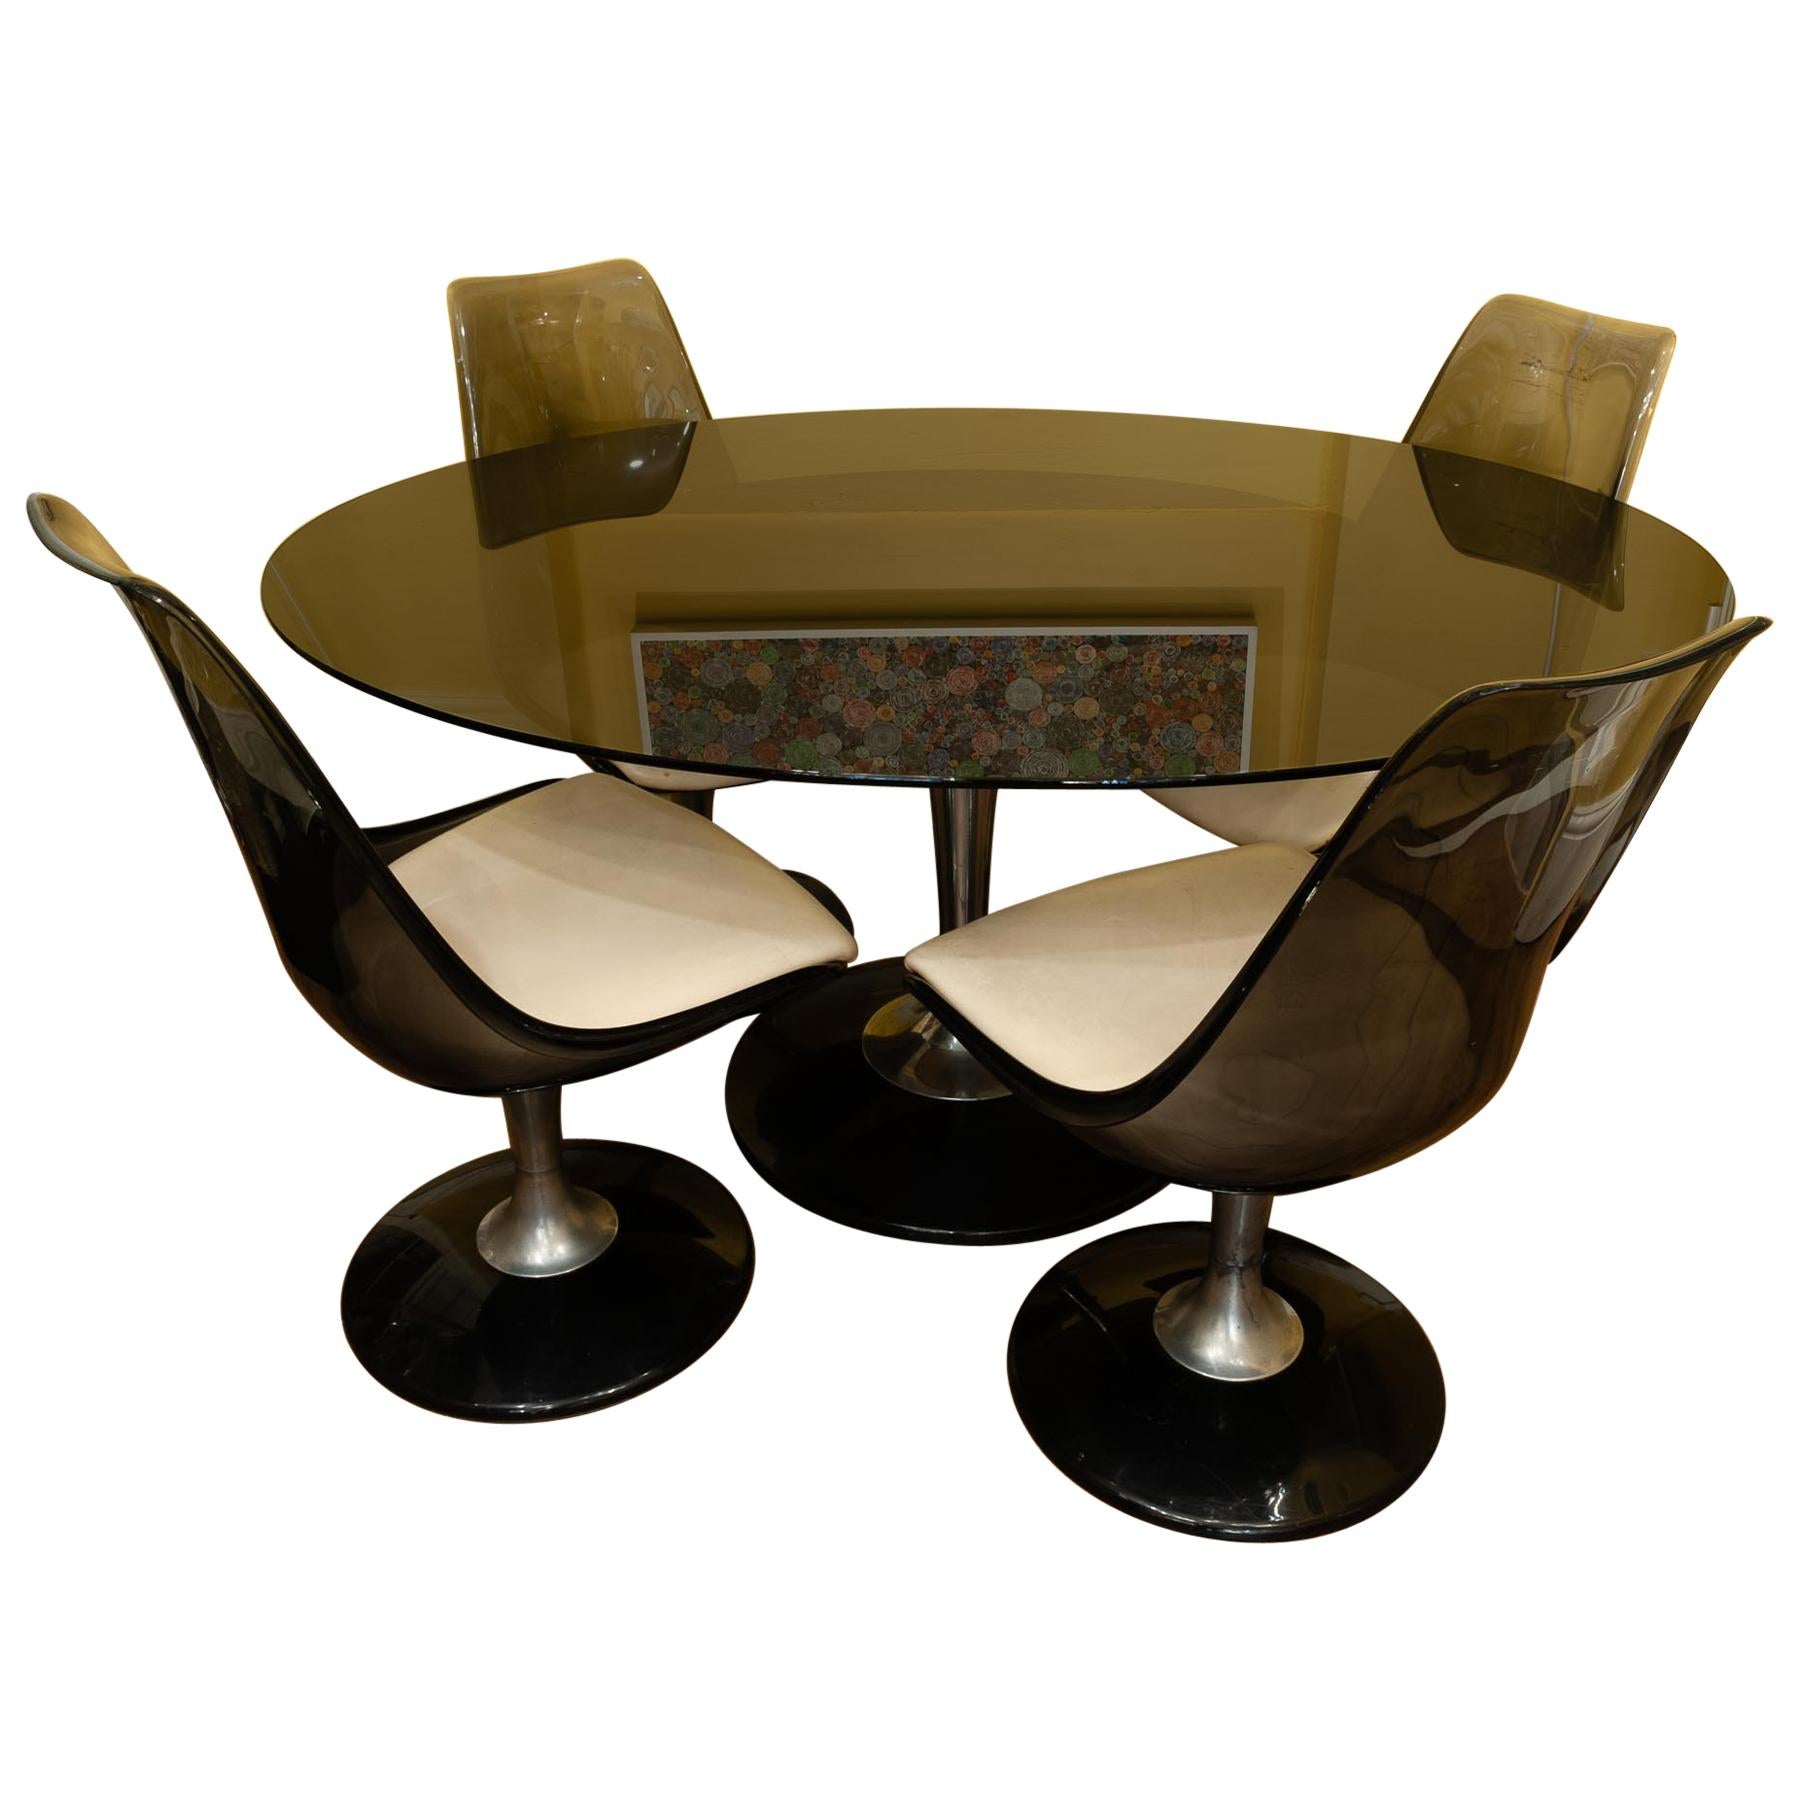 1970s Chromcraft Smoked Glass and Lucite Oval Tulip Dining Table and 4 Chairs